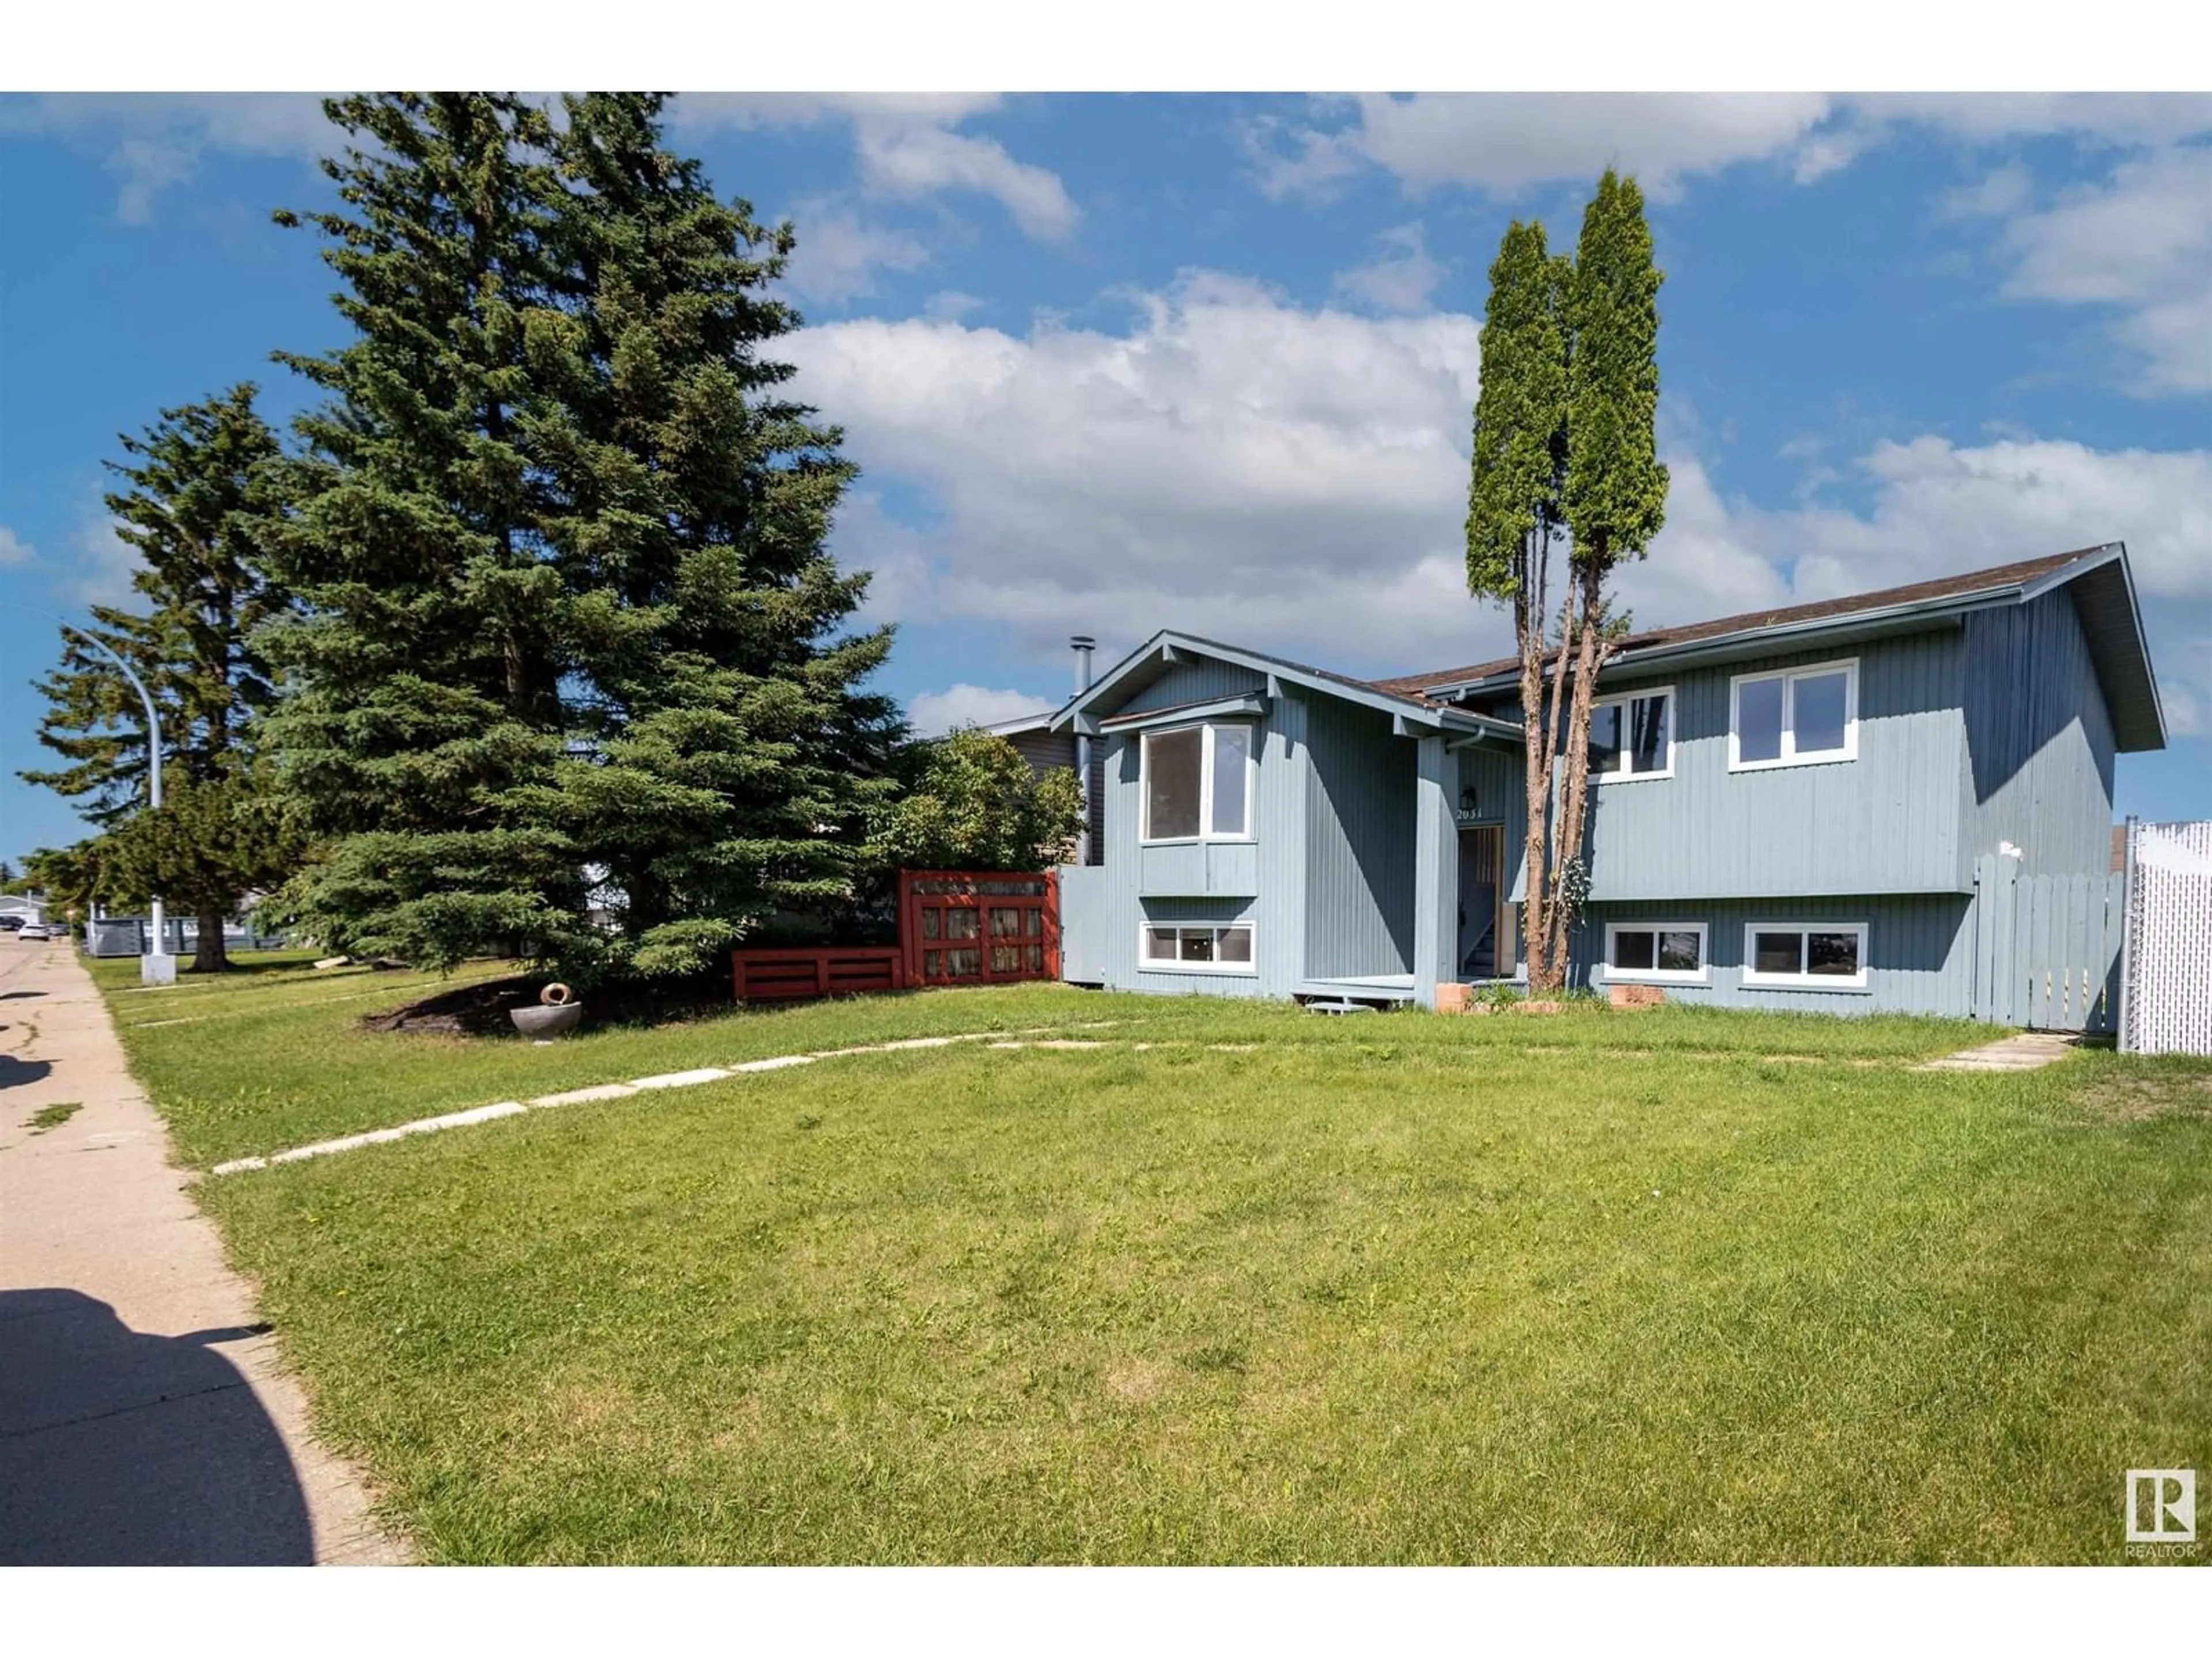 Frontside or backside of a home for 2031 48 ST NW NW, Edmonton Alberta T6L2W5